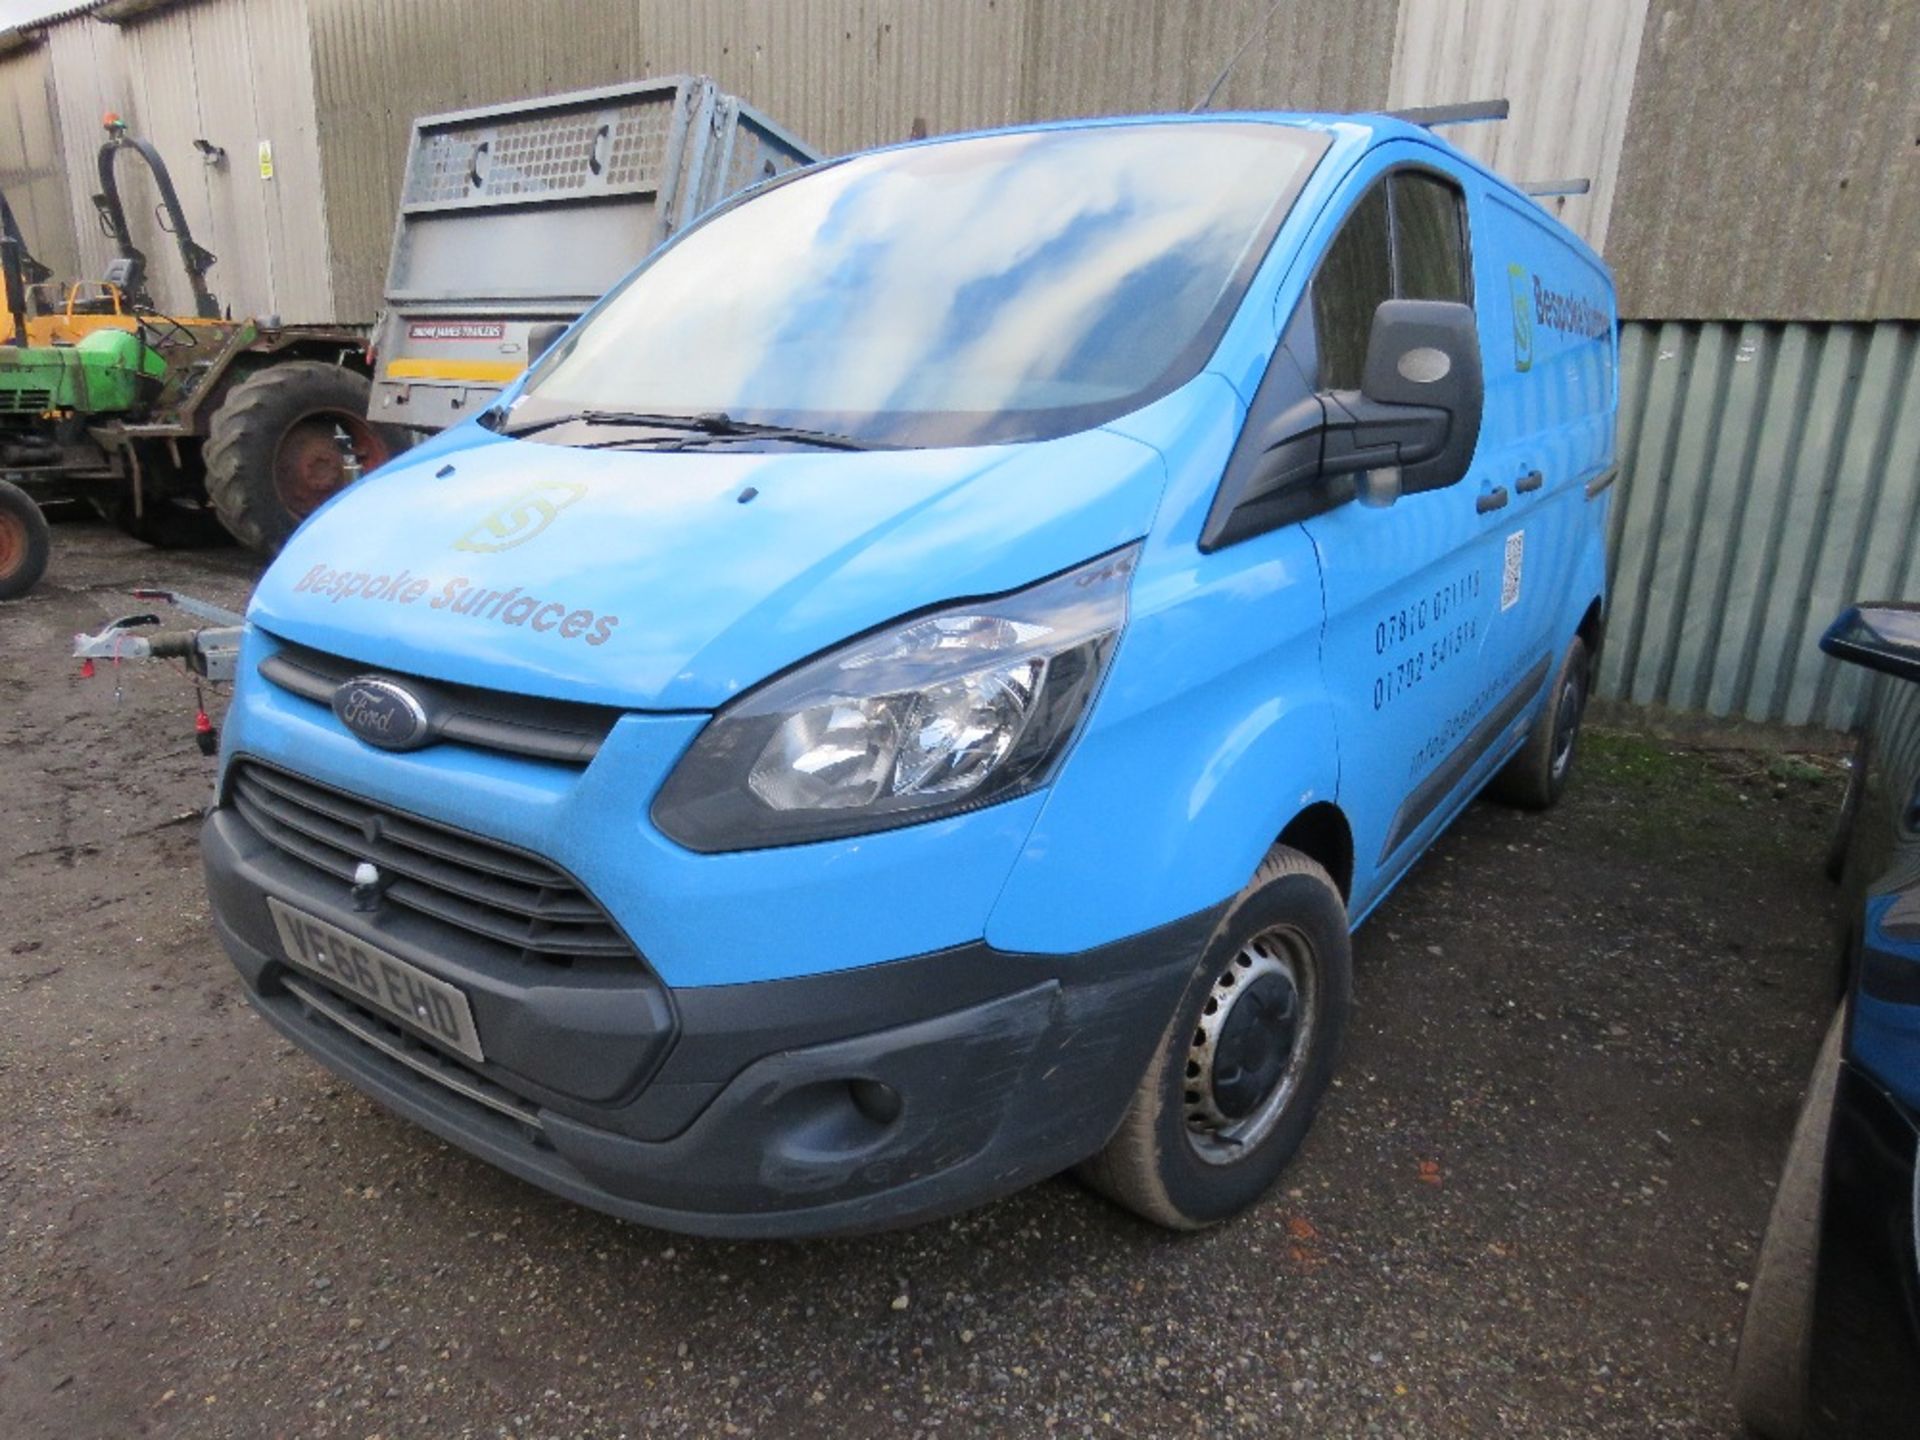 FORD TRANSIT CUSTOM 310 PANEL VAN WITH ROOF RACK REG:VE66 EHD. WITH V5 AND TEST UNTIL 18.05.23. DIRE - Image 2 of 9